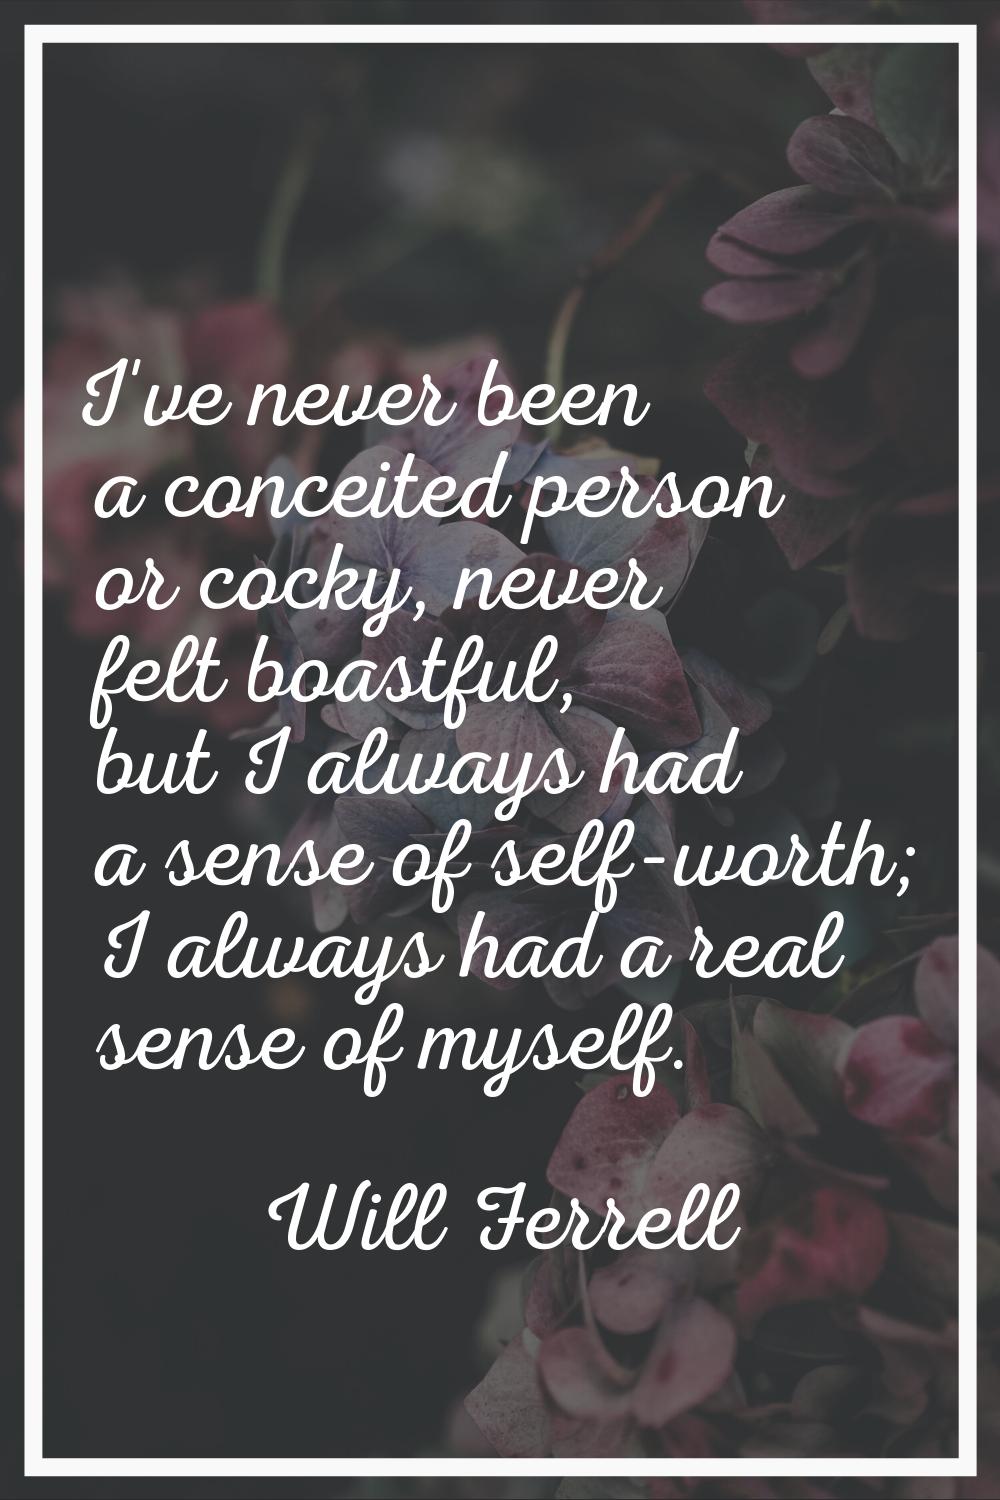 I've never been a conceited person or cocky, never felt boastful, but I always had a sense of self-